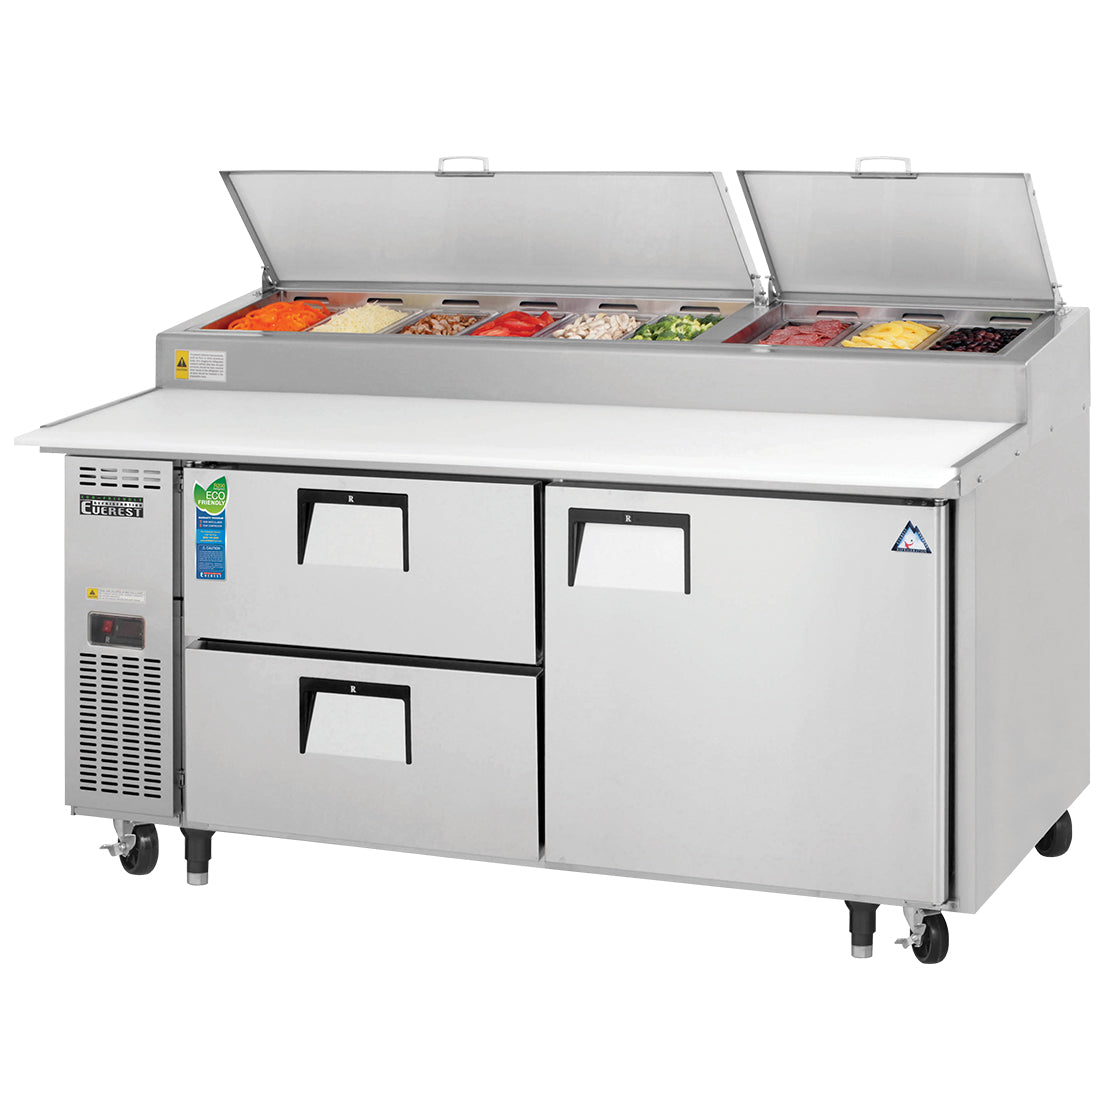 Everest EP Series-EPPR2-D2 One Section Two Drawer Side Mount Pizza Prep Table - 3D- 9 Cu. Ft.